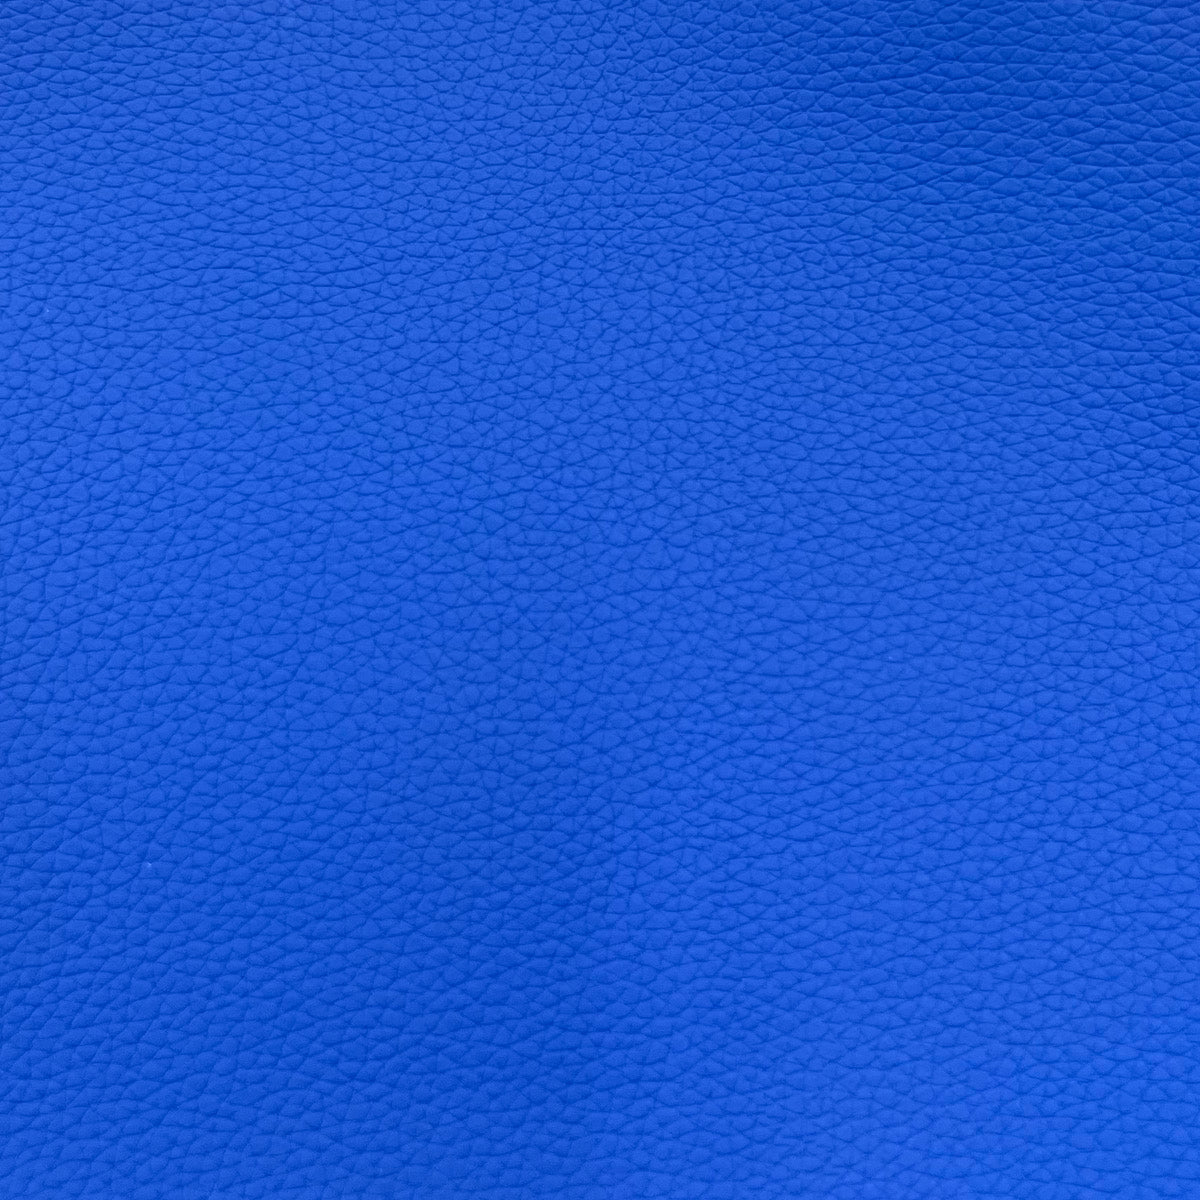 Royal Blue Diamond Quilted Faux Suede 3/8 Foam Backing 58 Wide